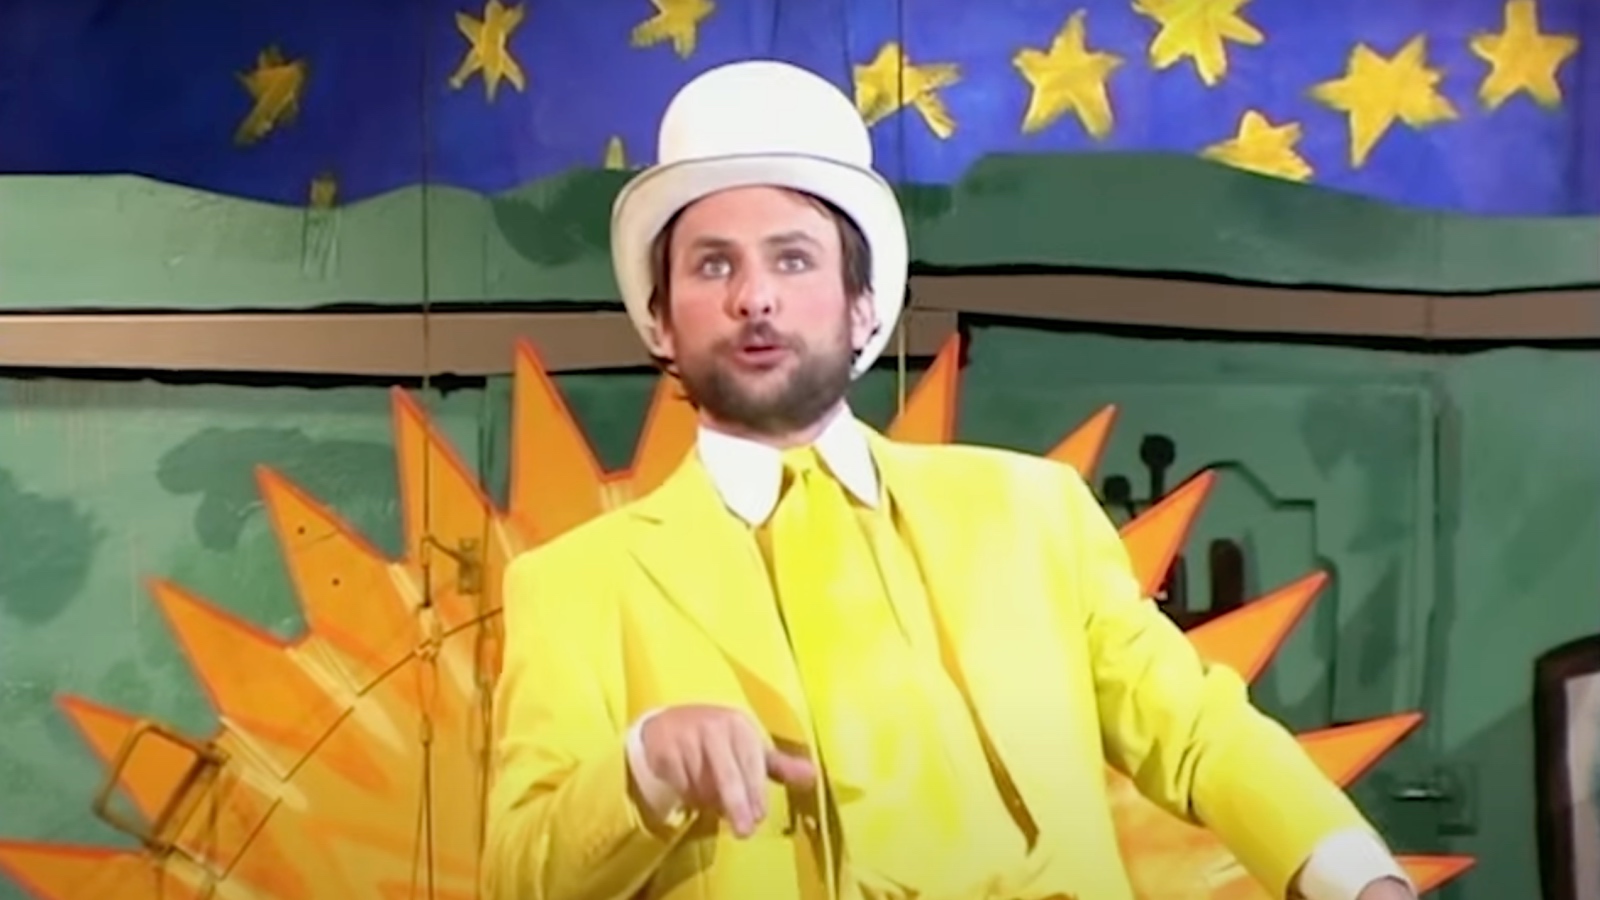 Charlie Day singing 'Day Man' in 'The Night Man Cometh' musical